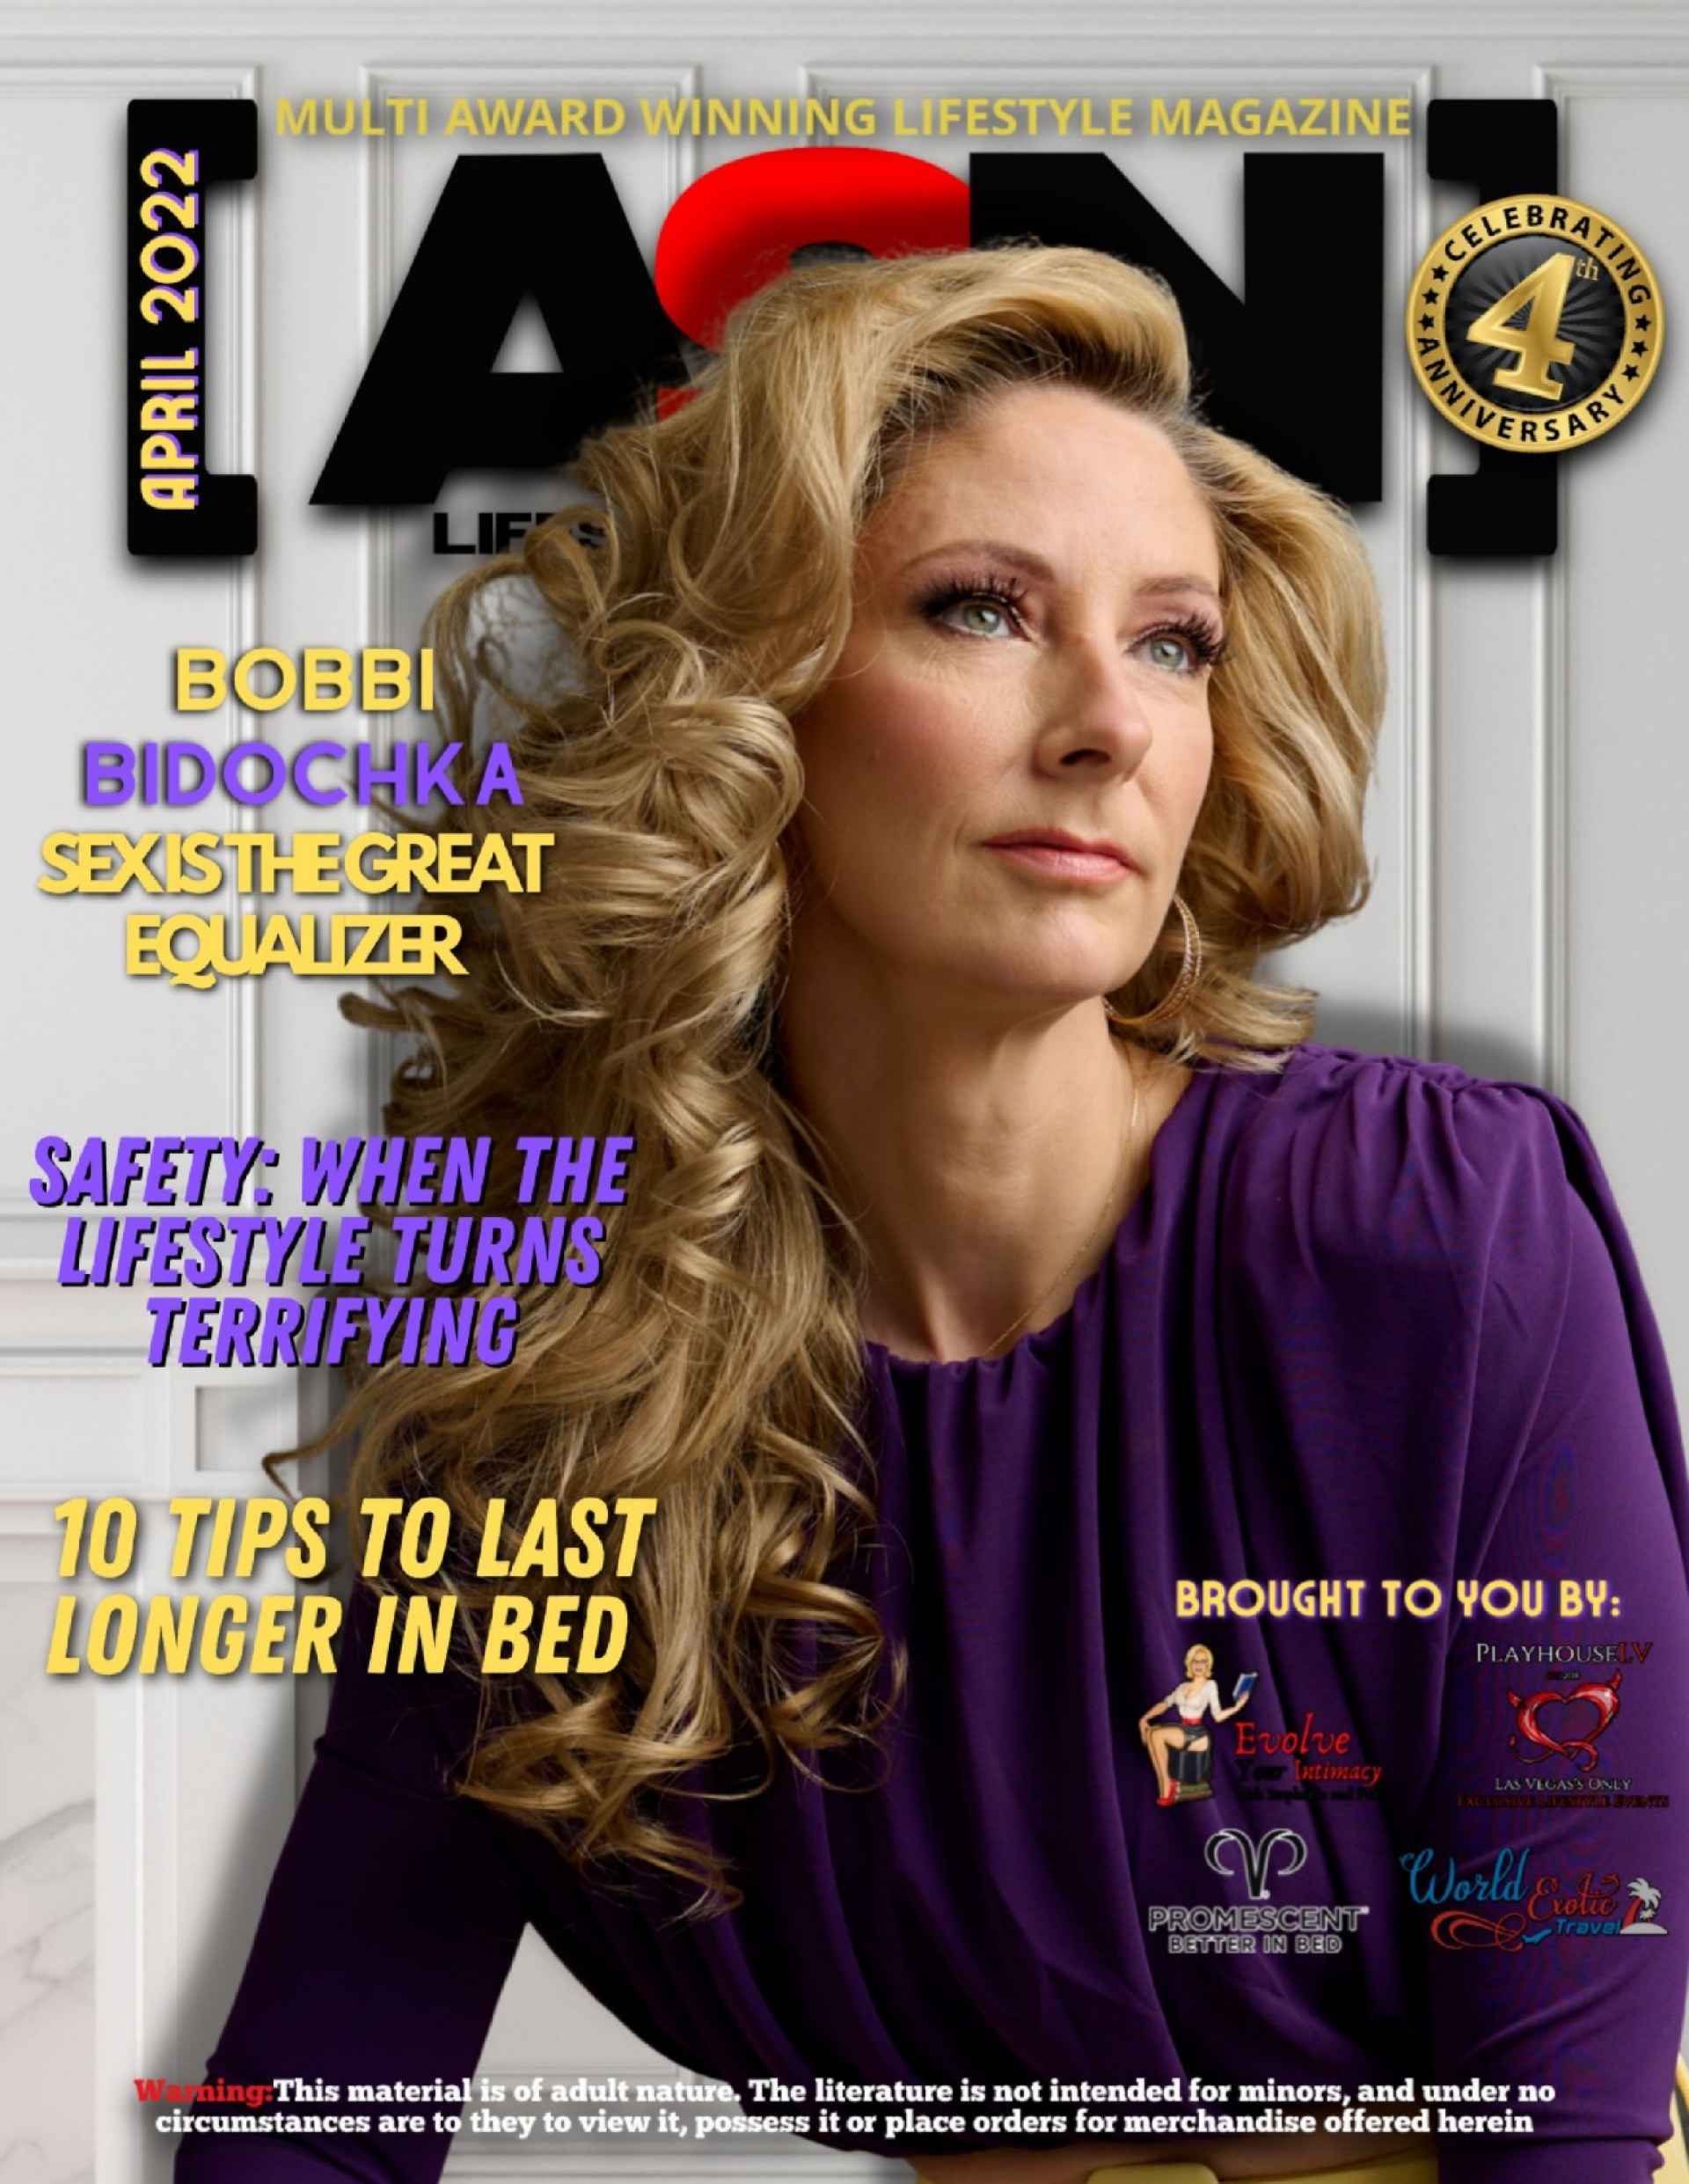 Cover image of ASN Lifestyle Magazine April 2022 issue